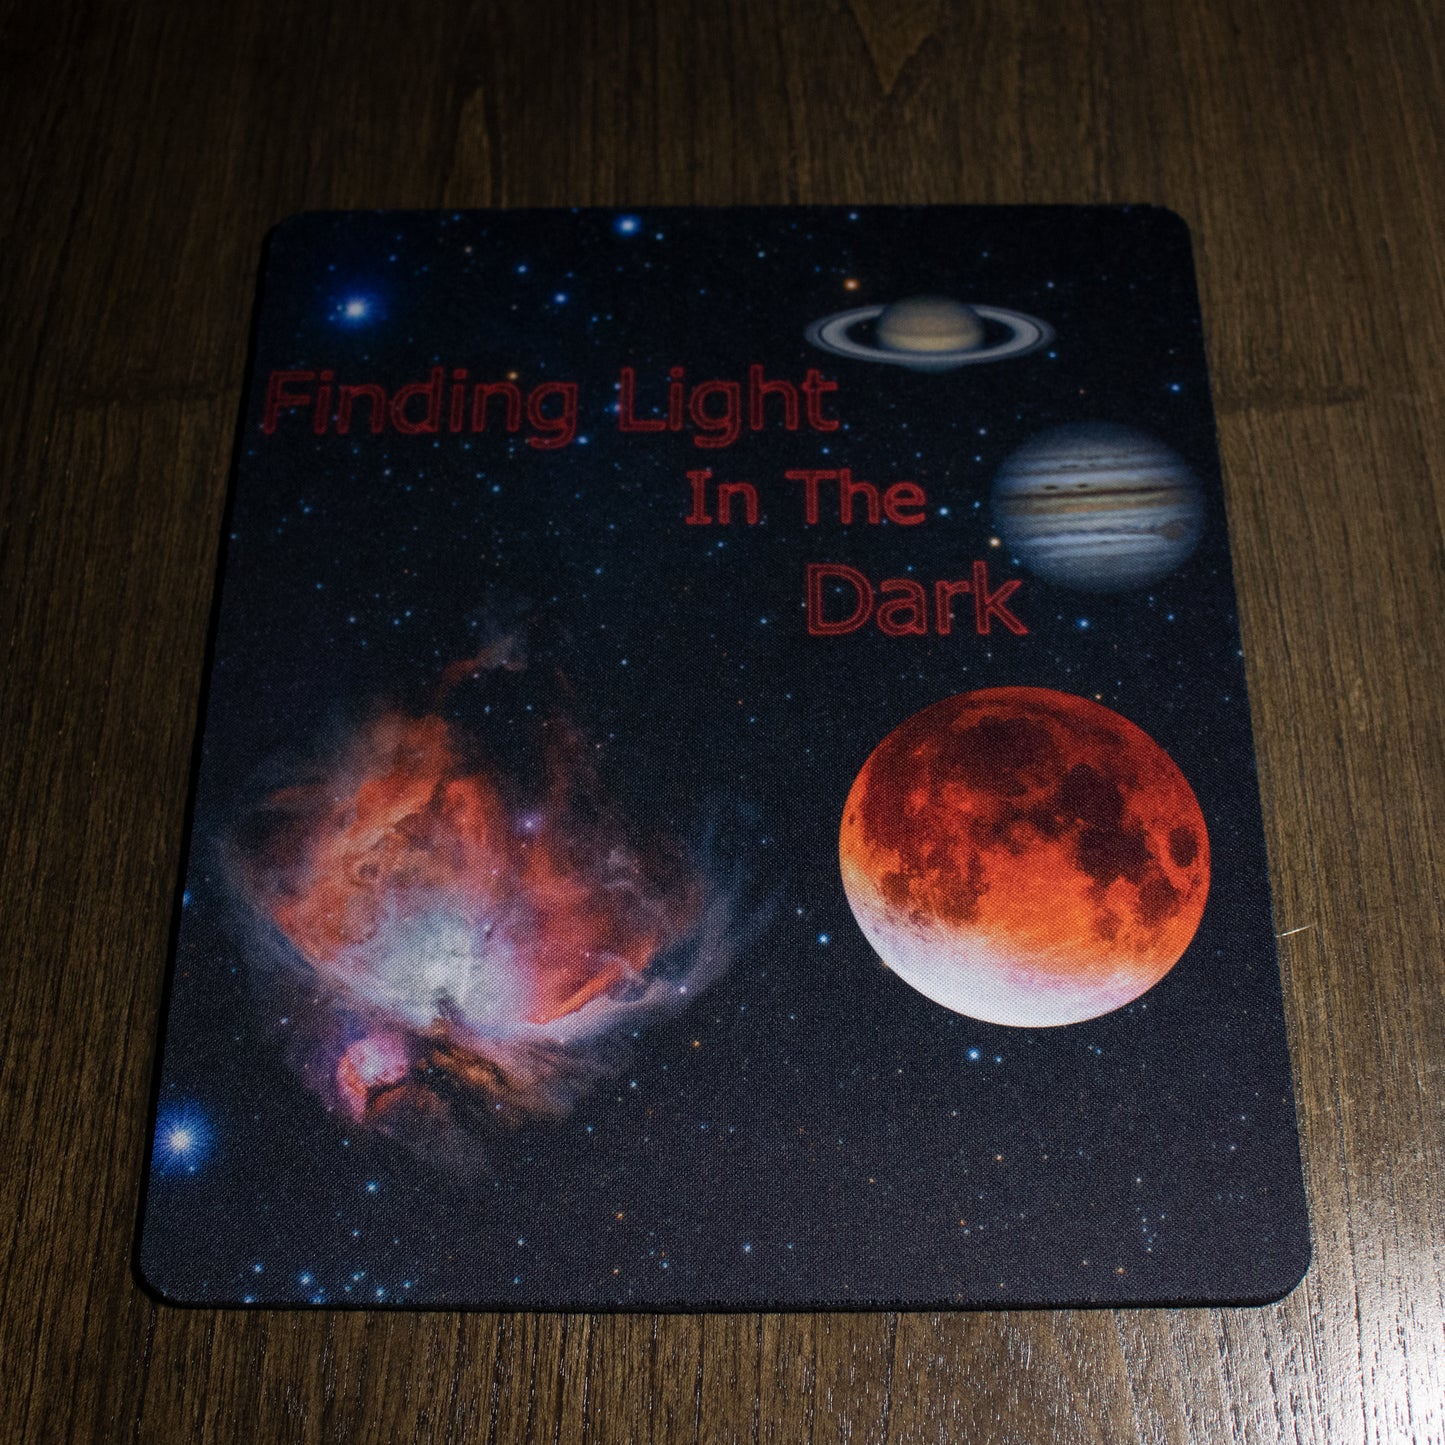 "Finding Light in the Dark" Mouse Pad with Augmented Reality (AR)